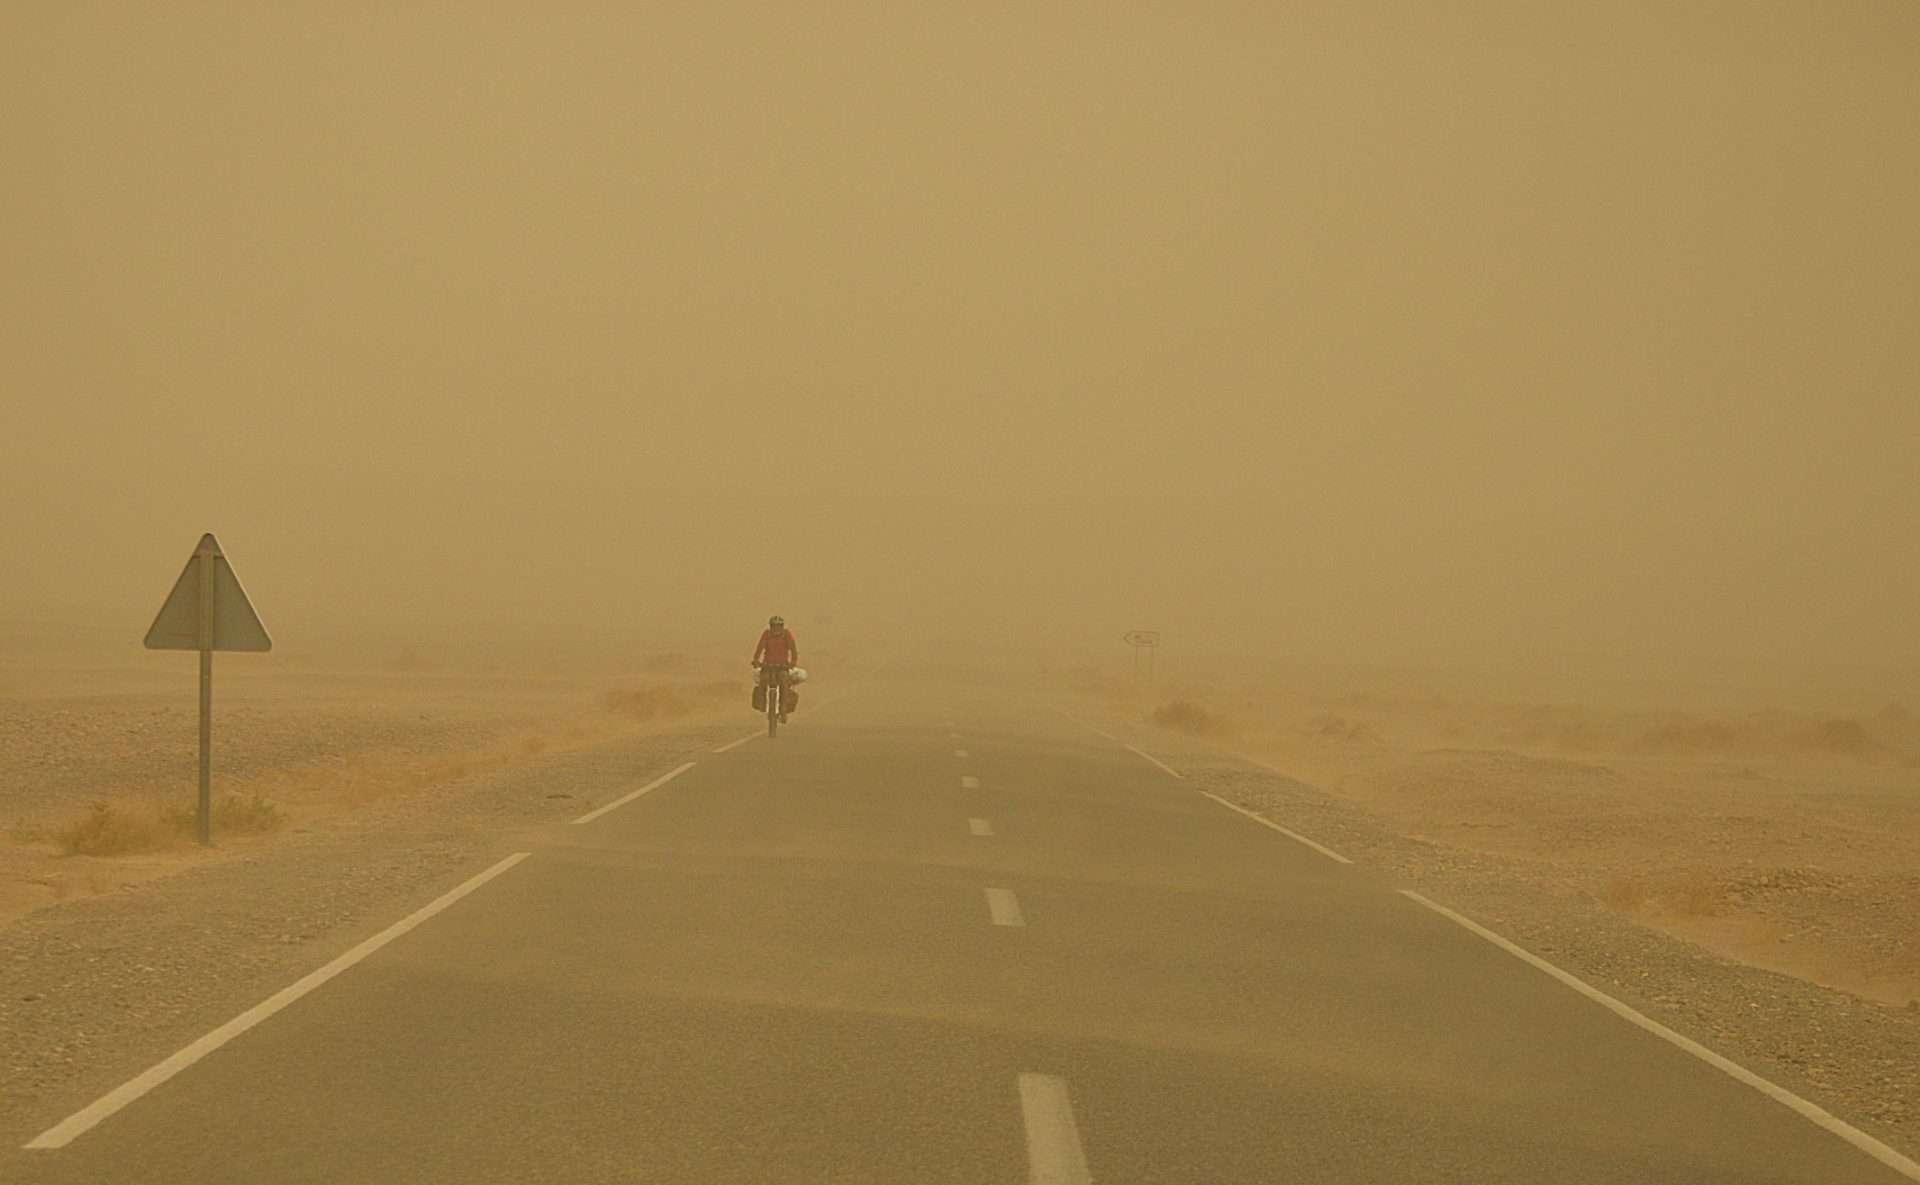 Person bicycling in a sandstorm.